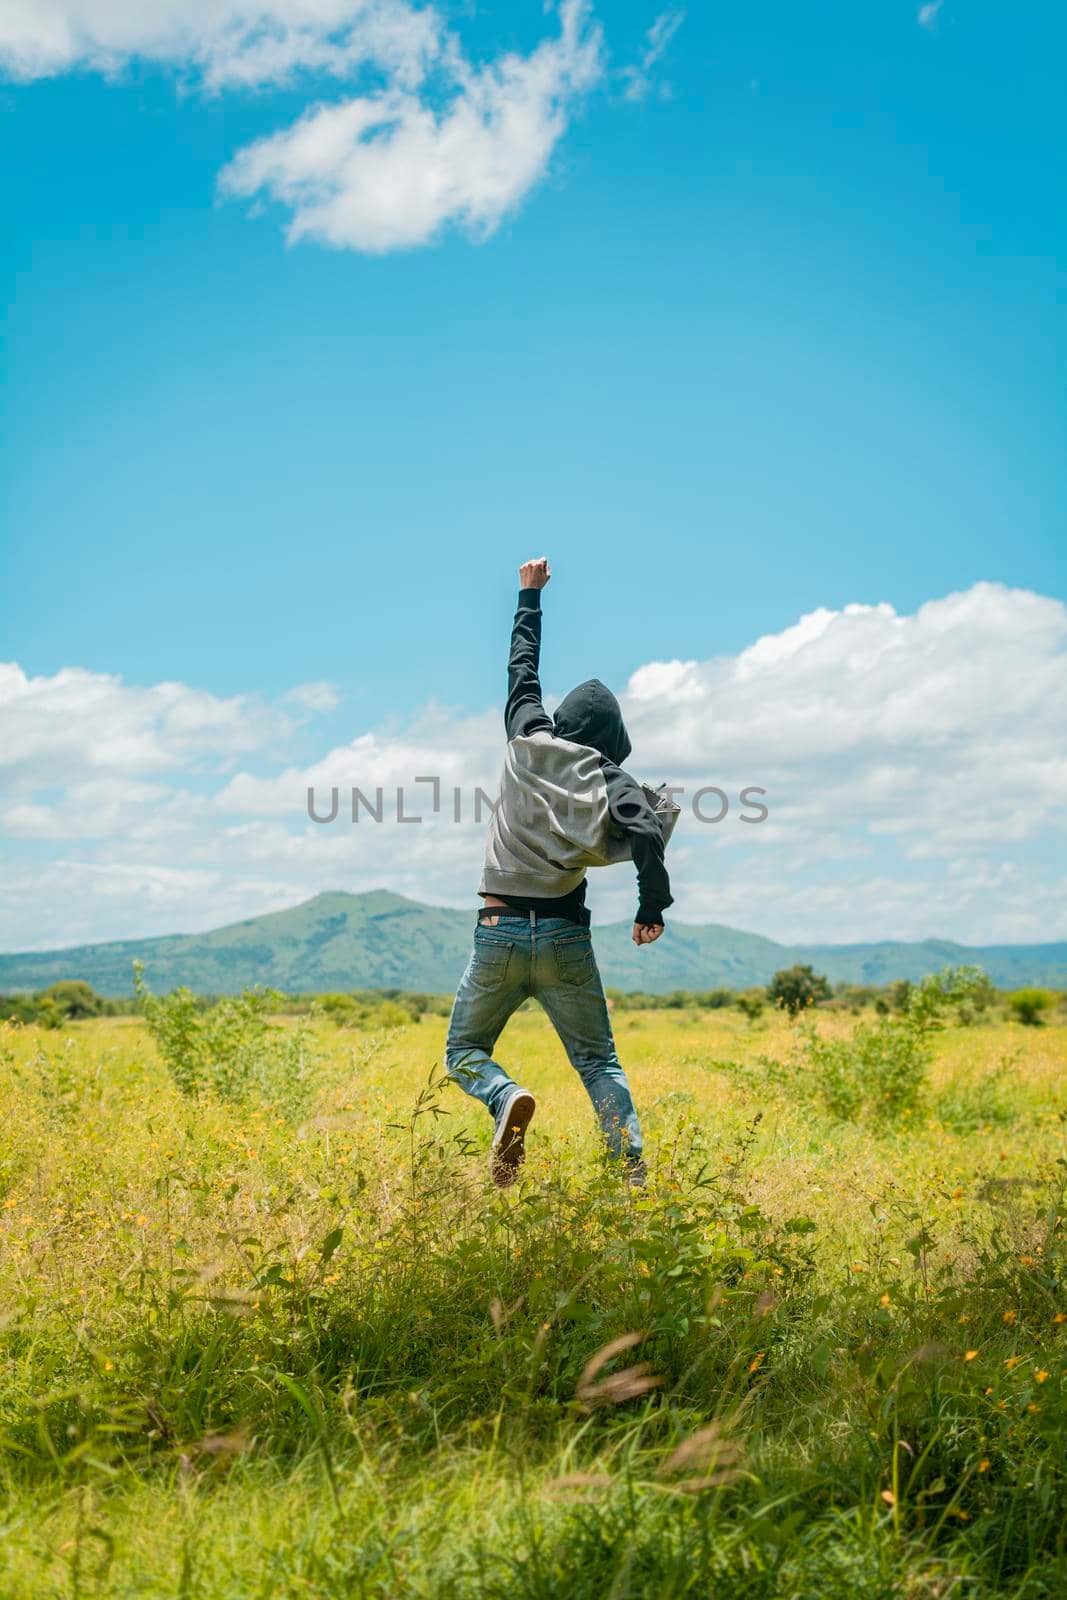 Concept of a free person jumping and raising his arm, Free person jumping with happiness in the field, man from back jumping in a nice field, Rear view of man jumping in the grass raising fist